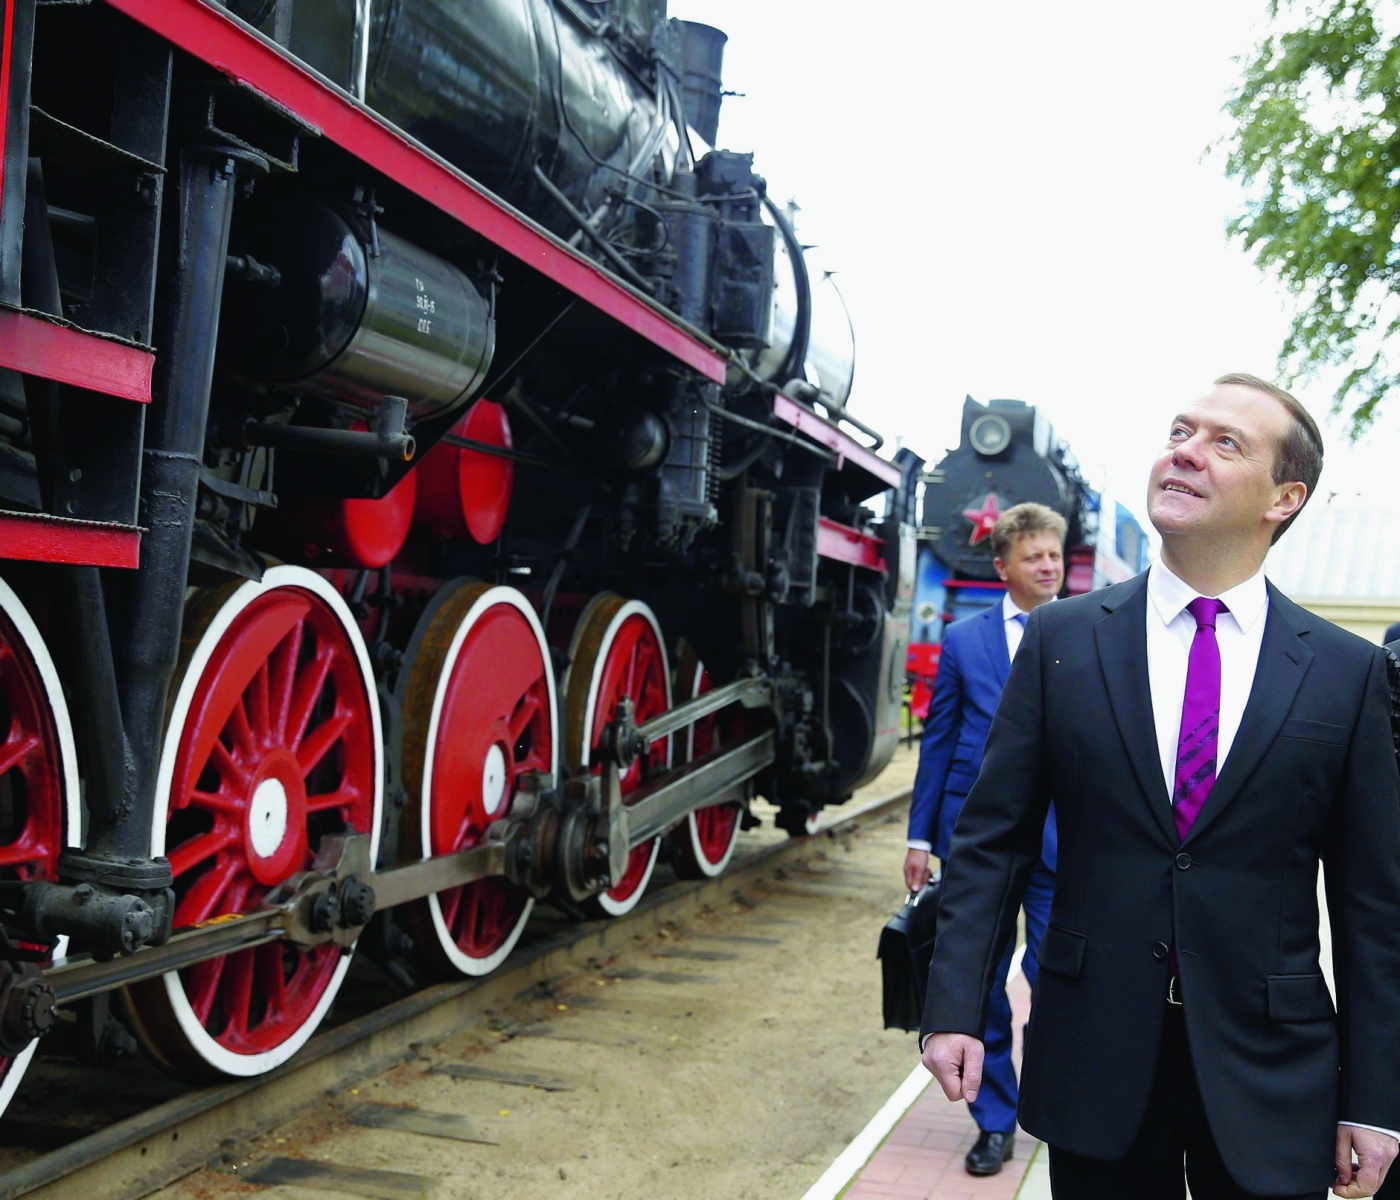 Russian Prime Minister Dmitry Medvedev visits a railway museum in Moscow, Russia on Tuesday, Sept. 13, 2016. (Dmitry Astakhov/ Sputnik, Government Press Service Pool photo via AP ) Russia Medvedev